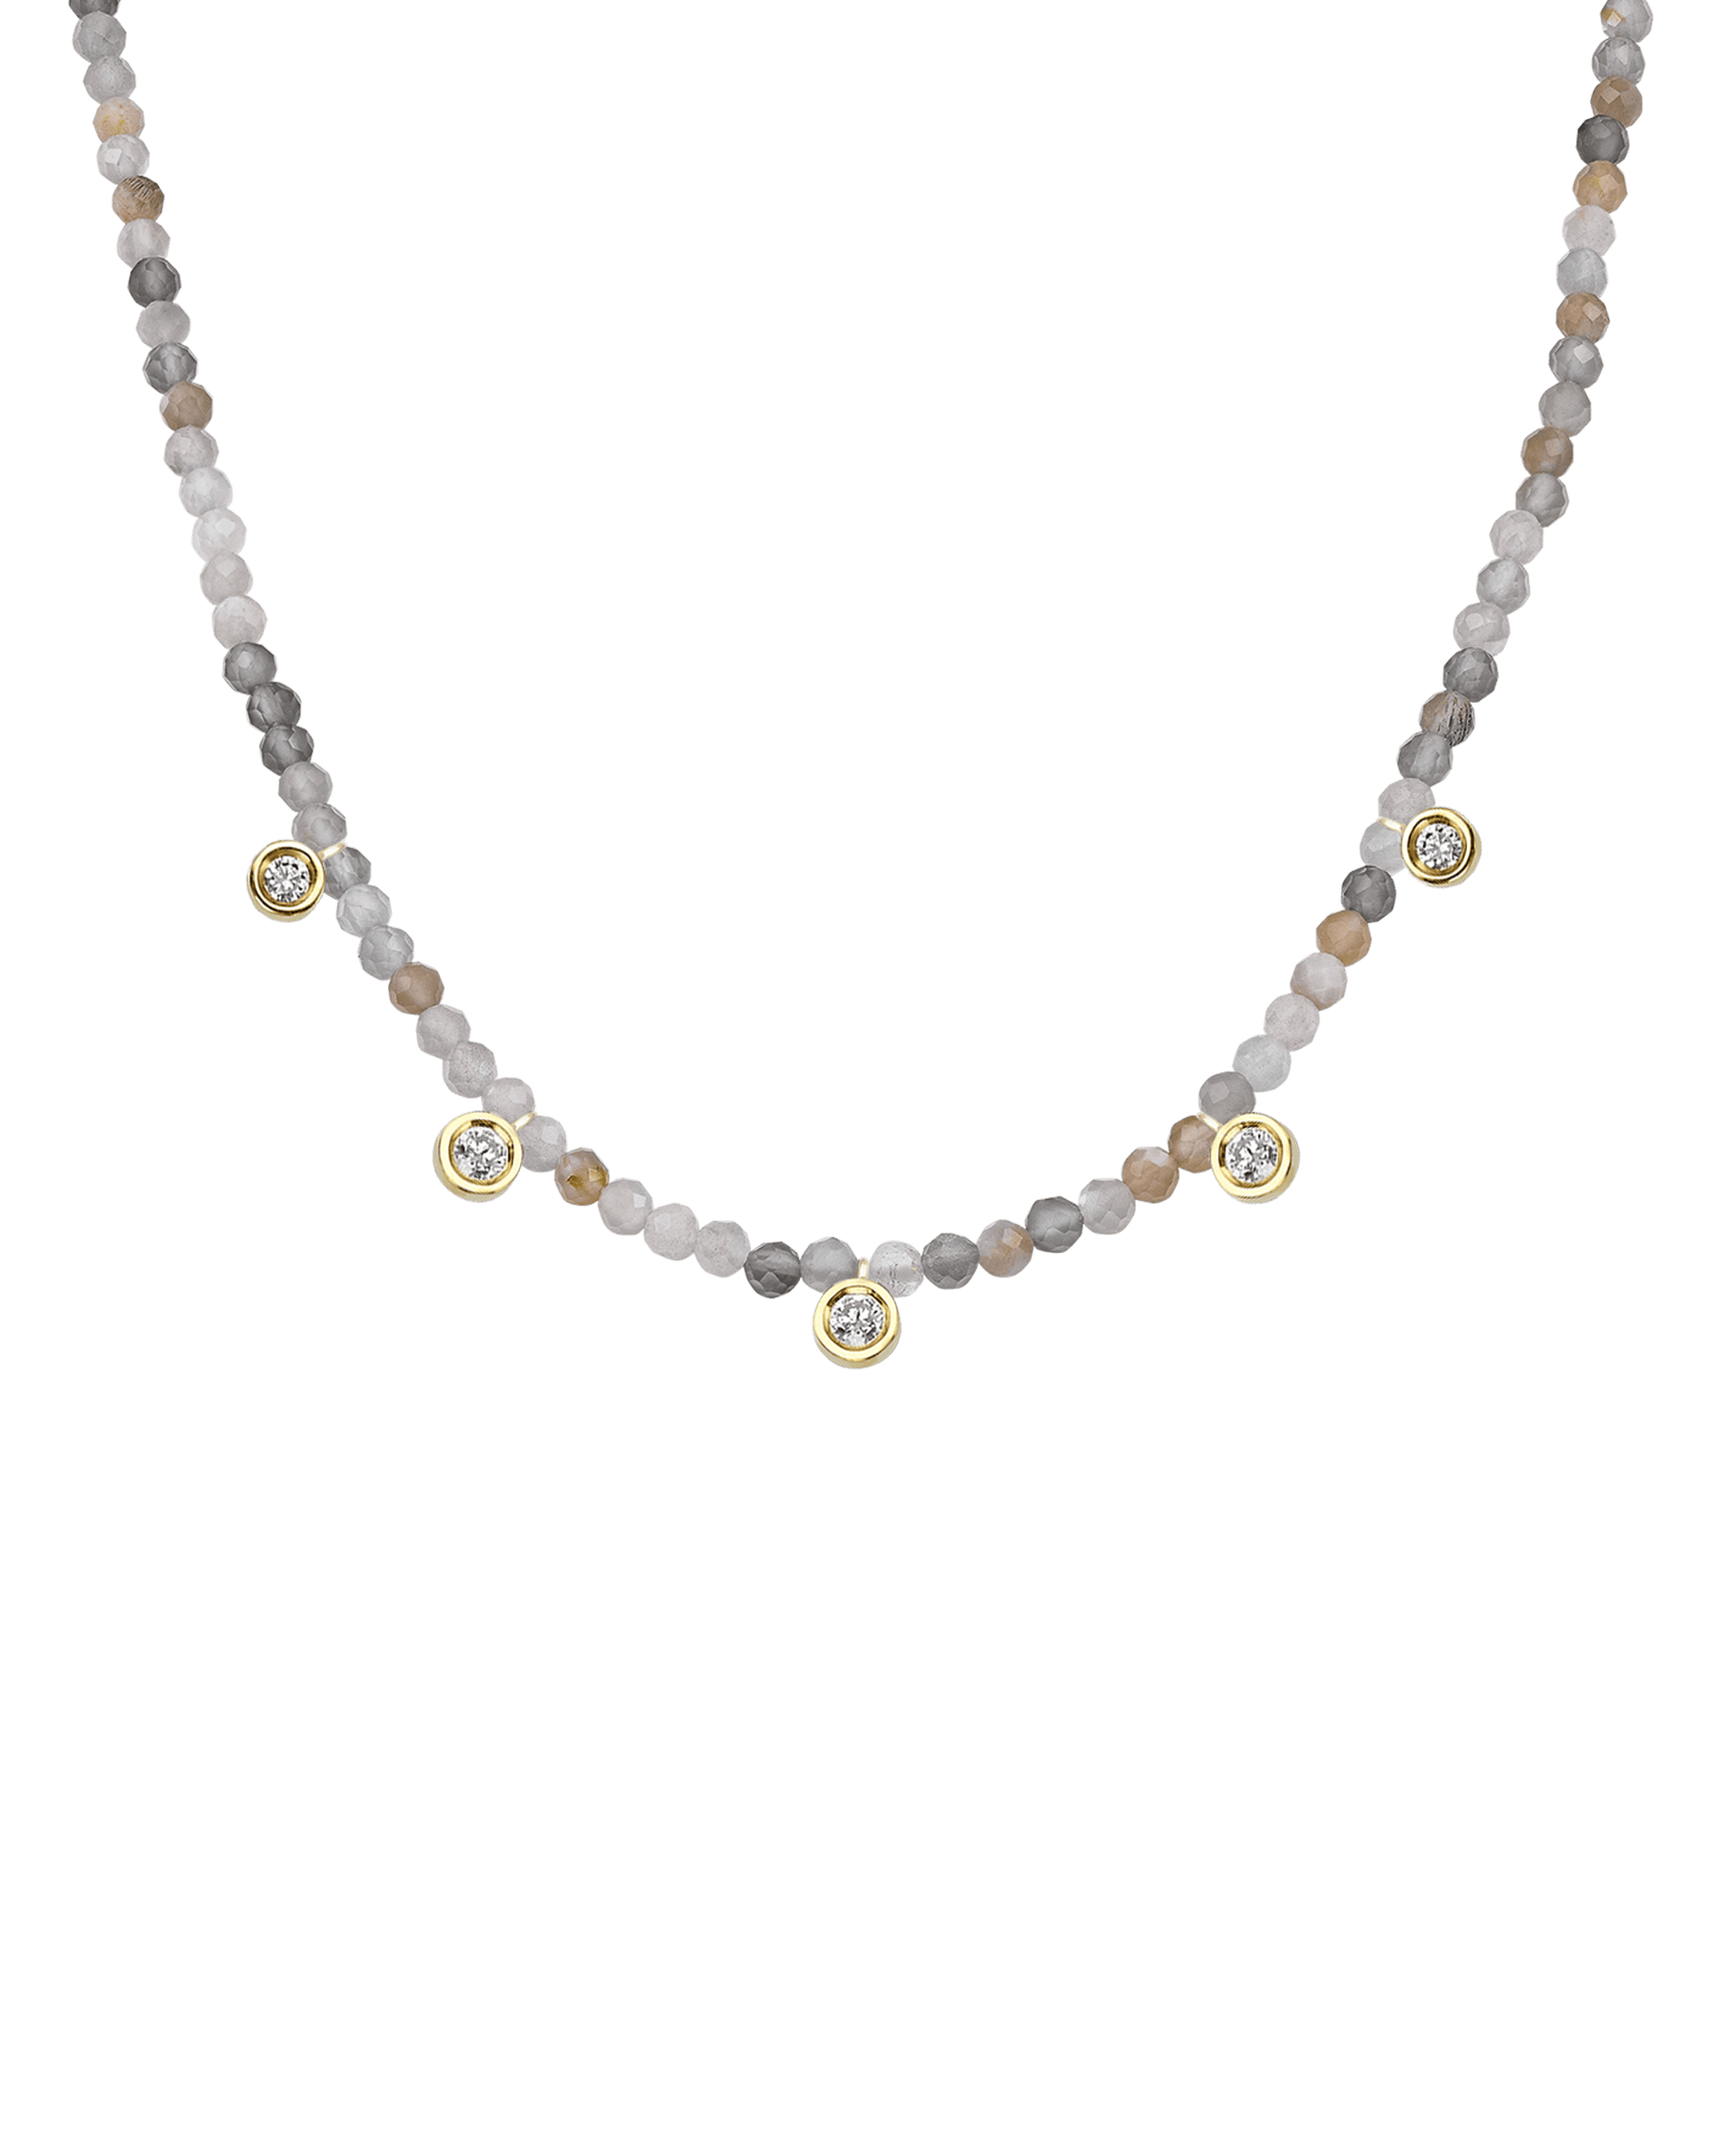 Black Spinel Gemstone & Five diamonds Necklace - 14K Yellow Gold Necklaces magal-dev Natural Moonstone 14" - Collar 